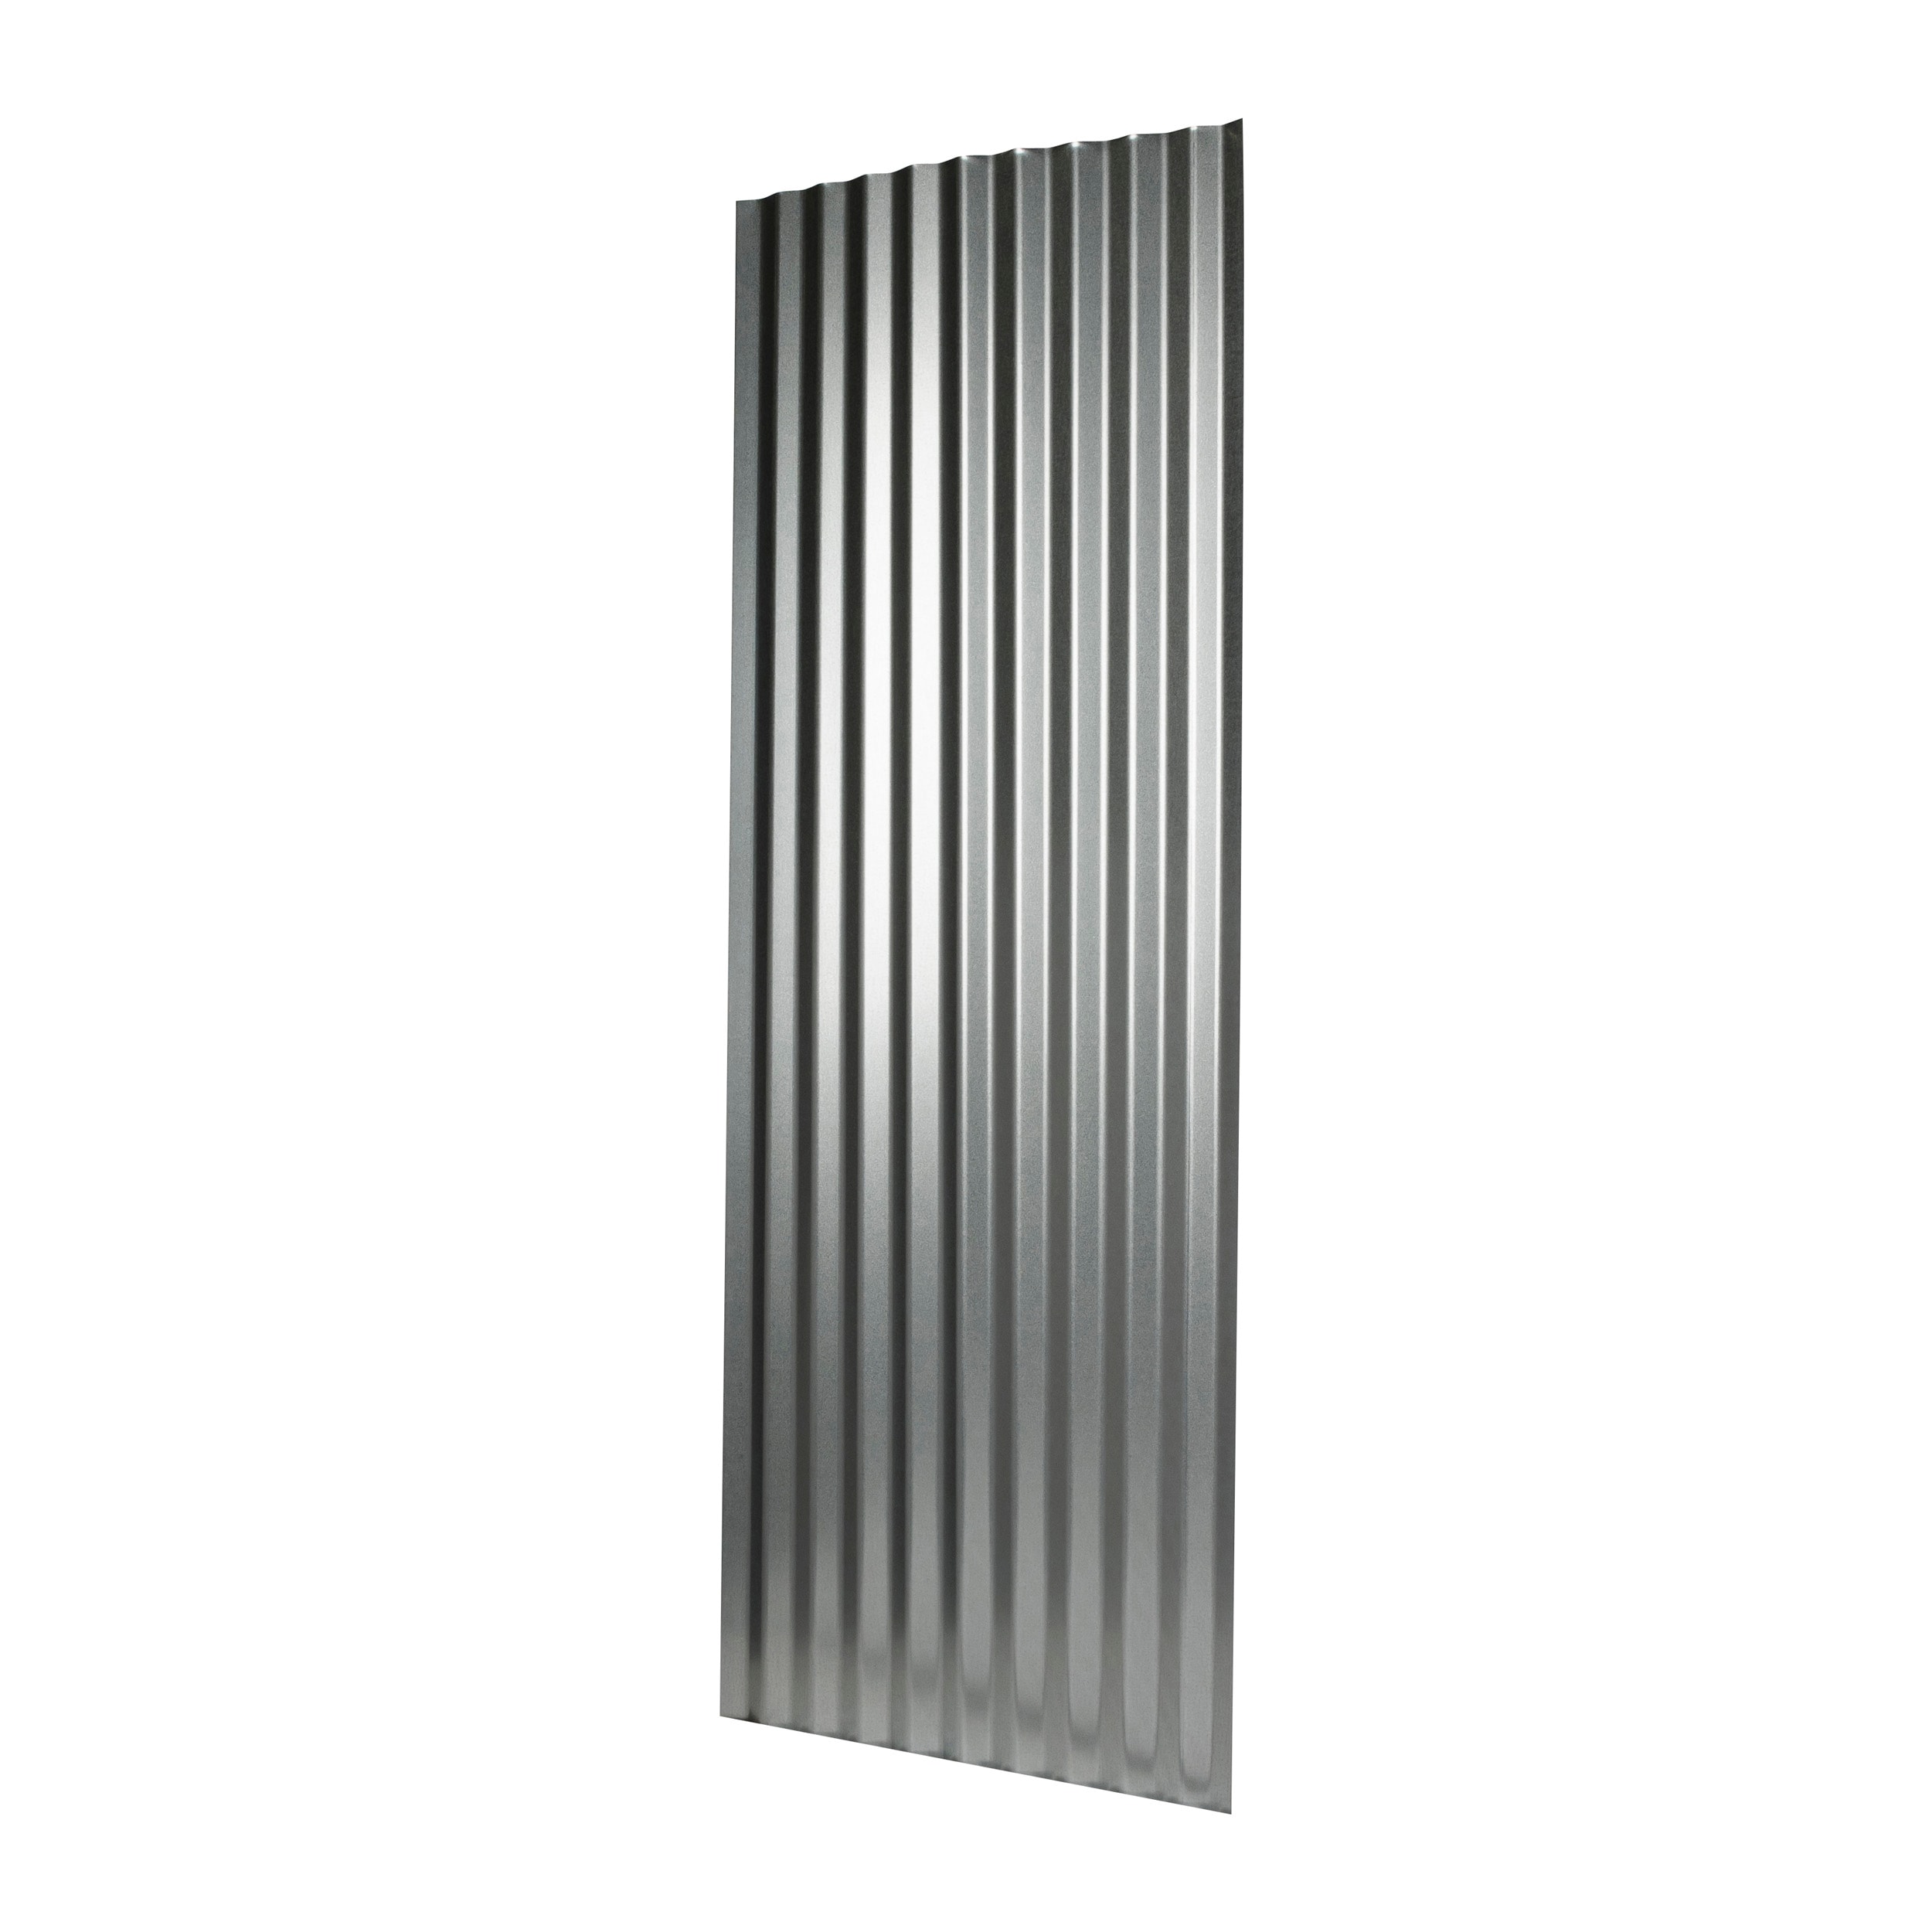 Corrugated Galvanized Metal Panels for Walls and Roofs